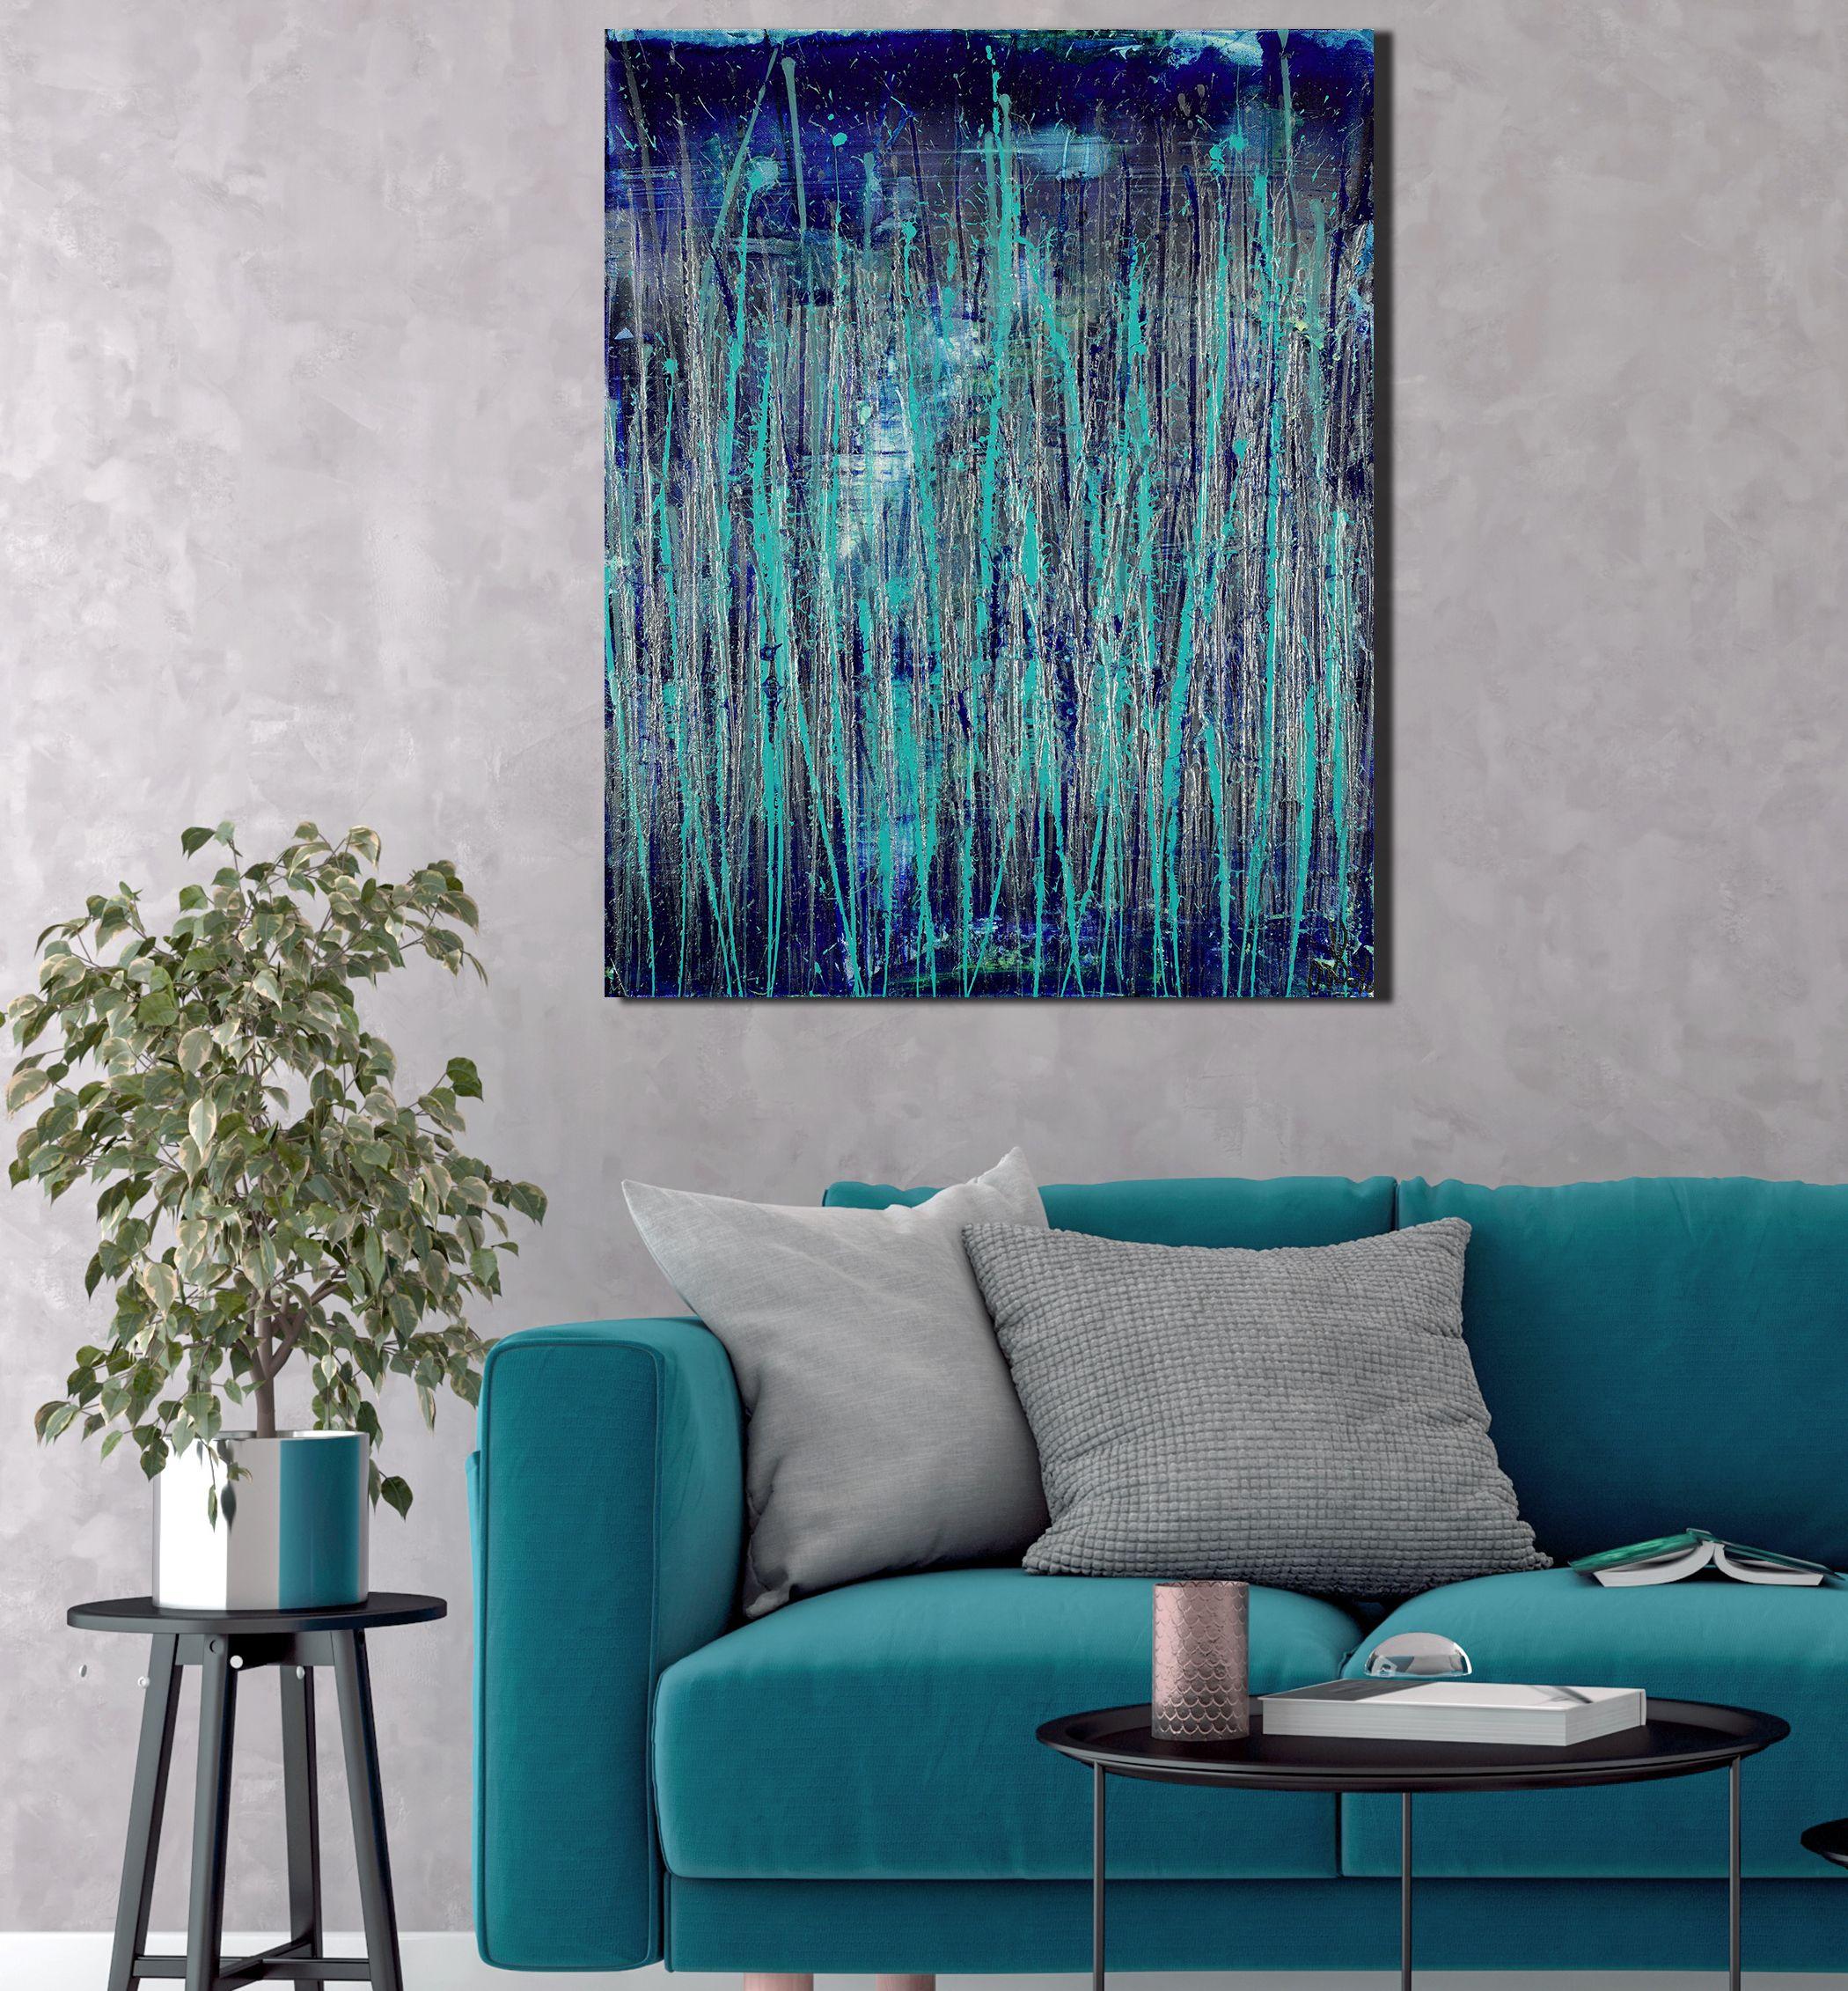 Vibrant expressionistic Inspired by nature abstract dark indigo blue, teal and silver background. Shades of metallic blue and silver. Ready to hang signed in front.    I include a certificate of authenticity that lists the materials as well as when